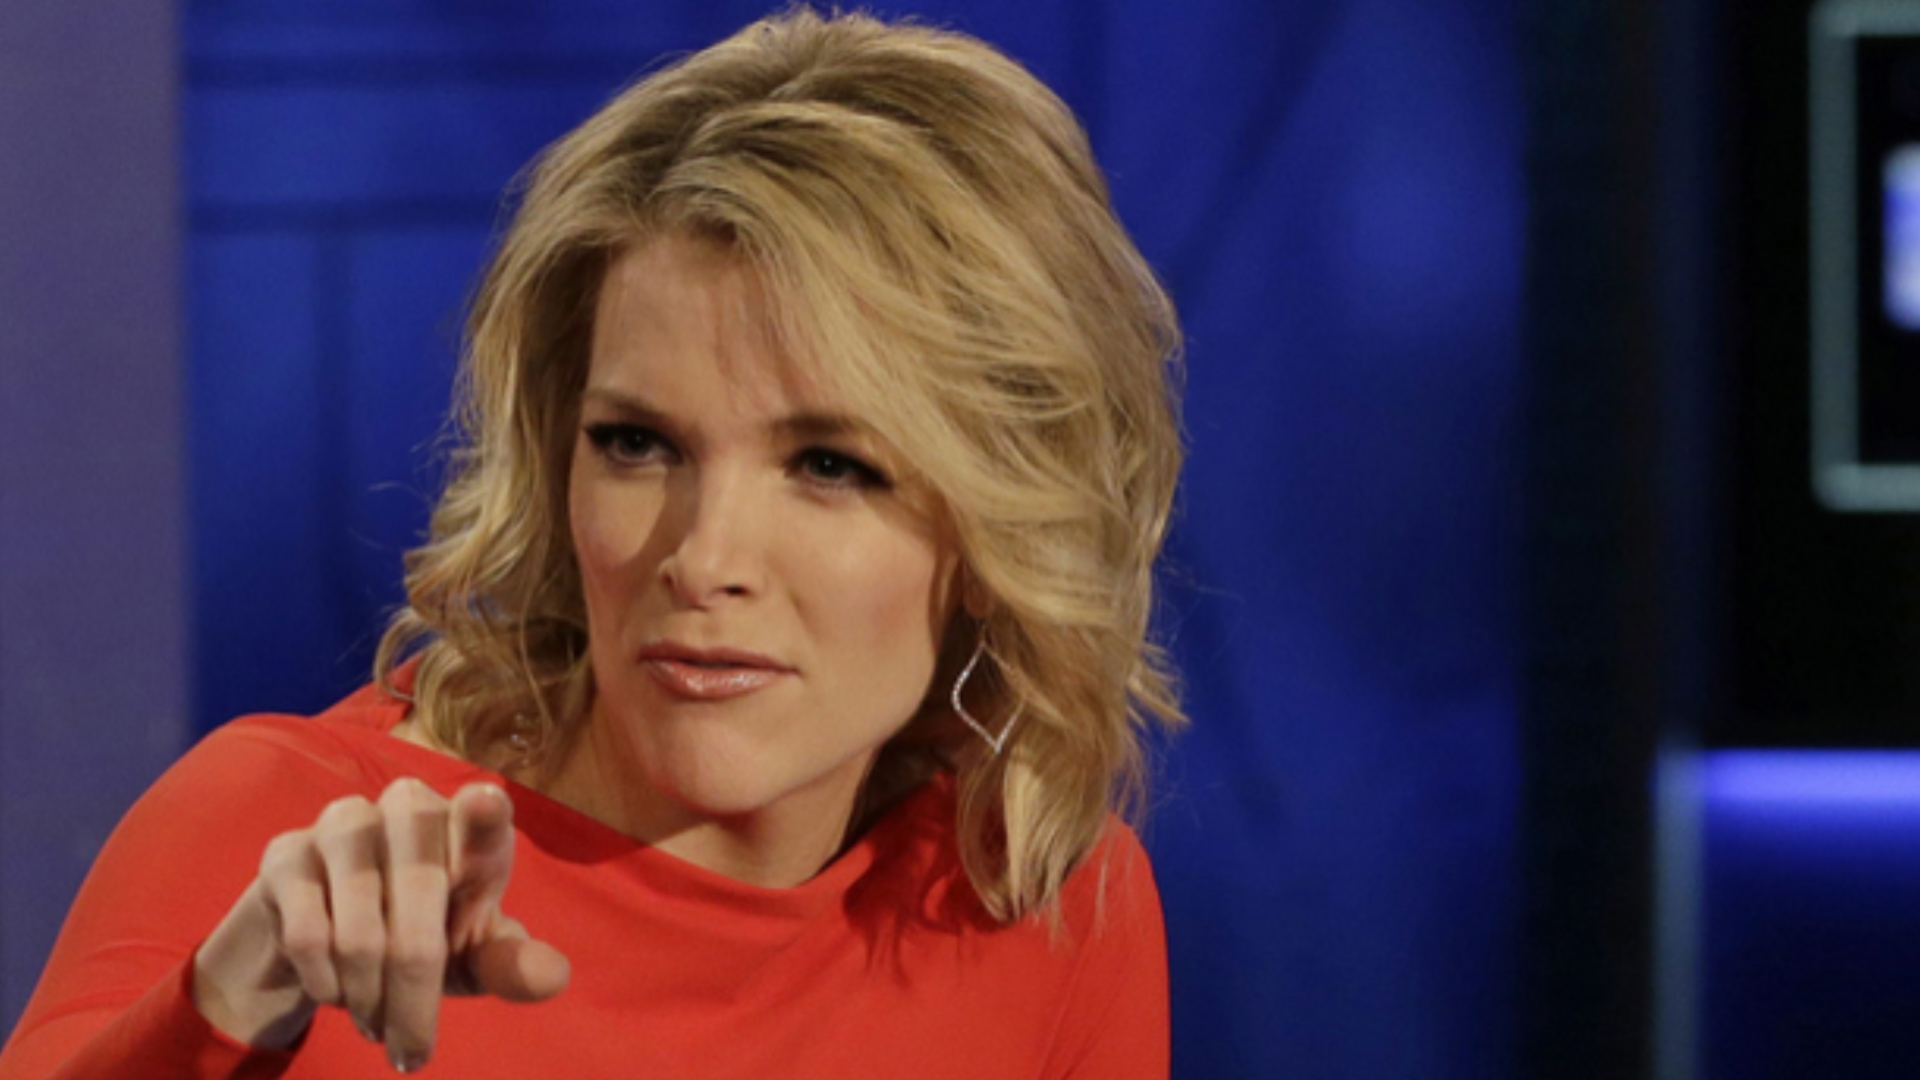 Megan Kelly fired from NBC over “blackface” Halloween costume suggestion proves there is no placating the language police of the Left